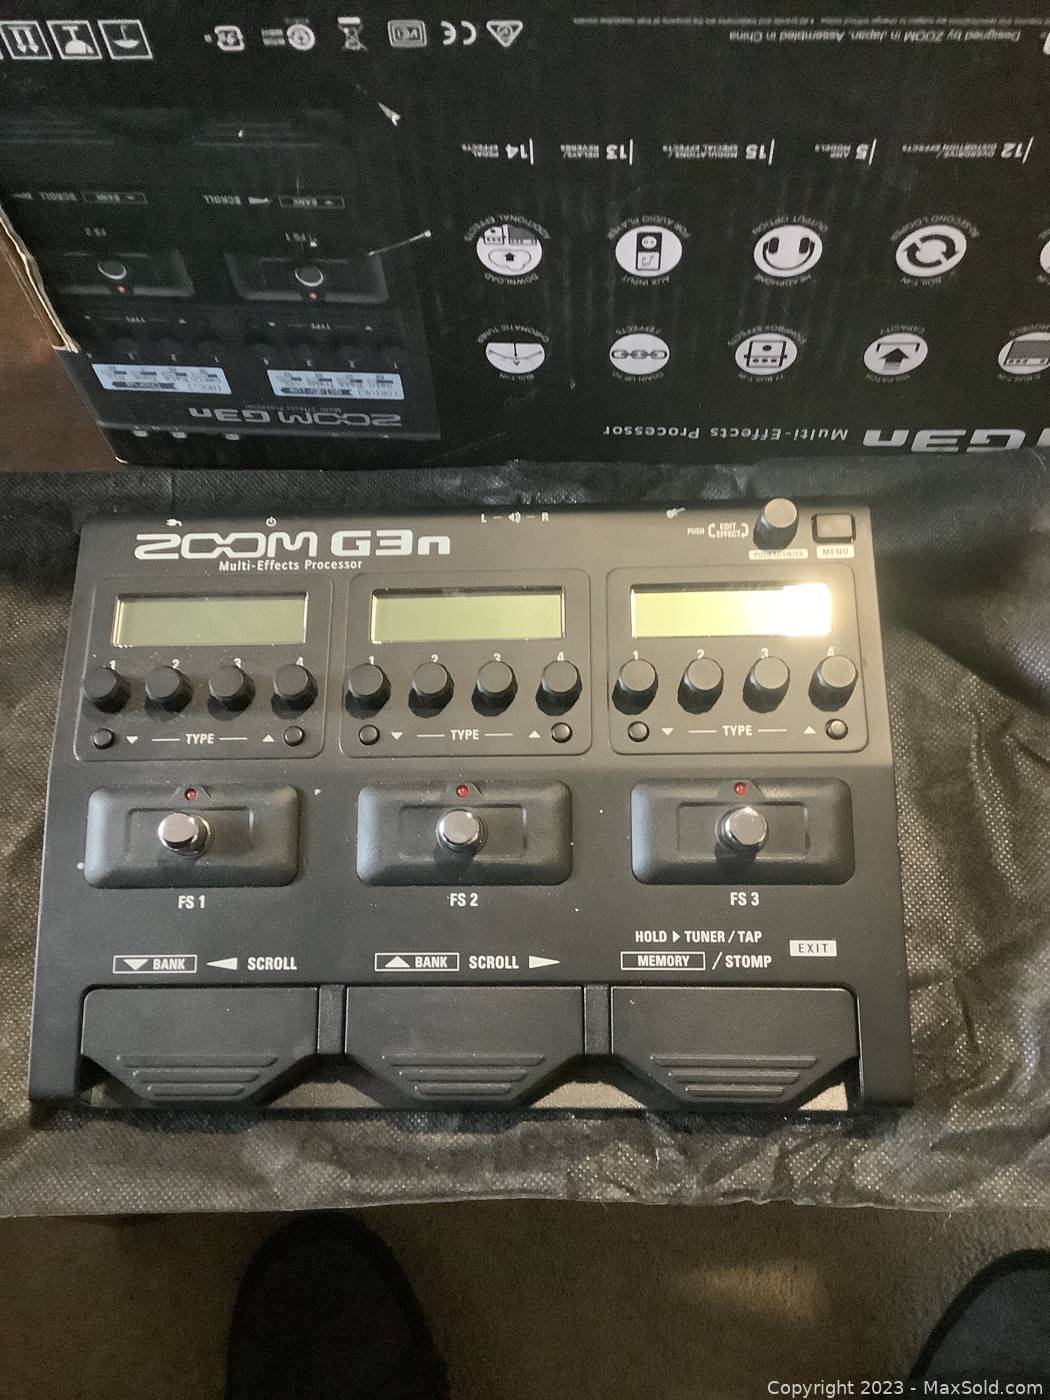 Zoom G3n Multi-Effects Processor for Guitar | MaxSold